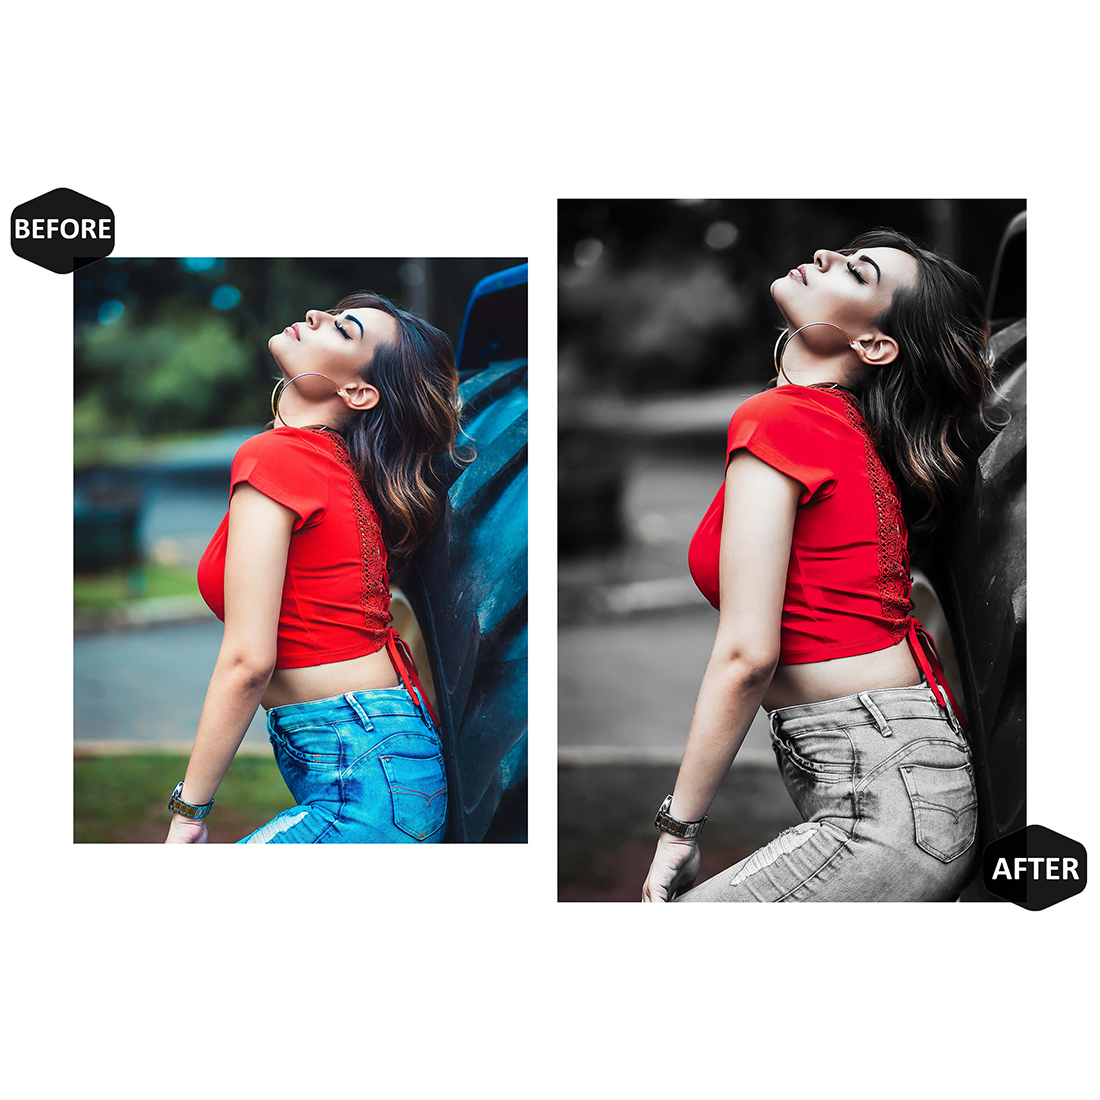 12 Photoshop Actions, Lady In Red Ps Action, Monochrome ACR Preset, Focus Ps Filter, Atn Portrait And Lifestyle Theme For Instagram, Blogger preview image.